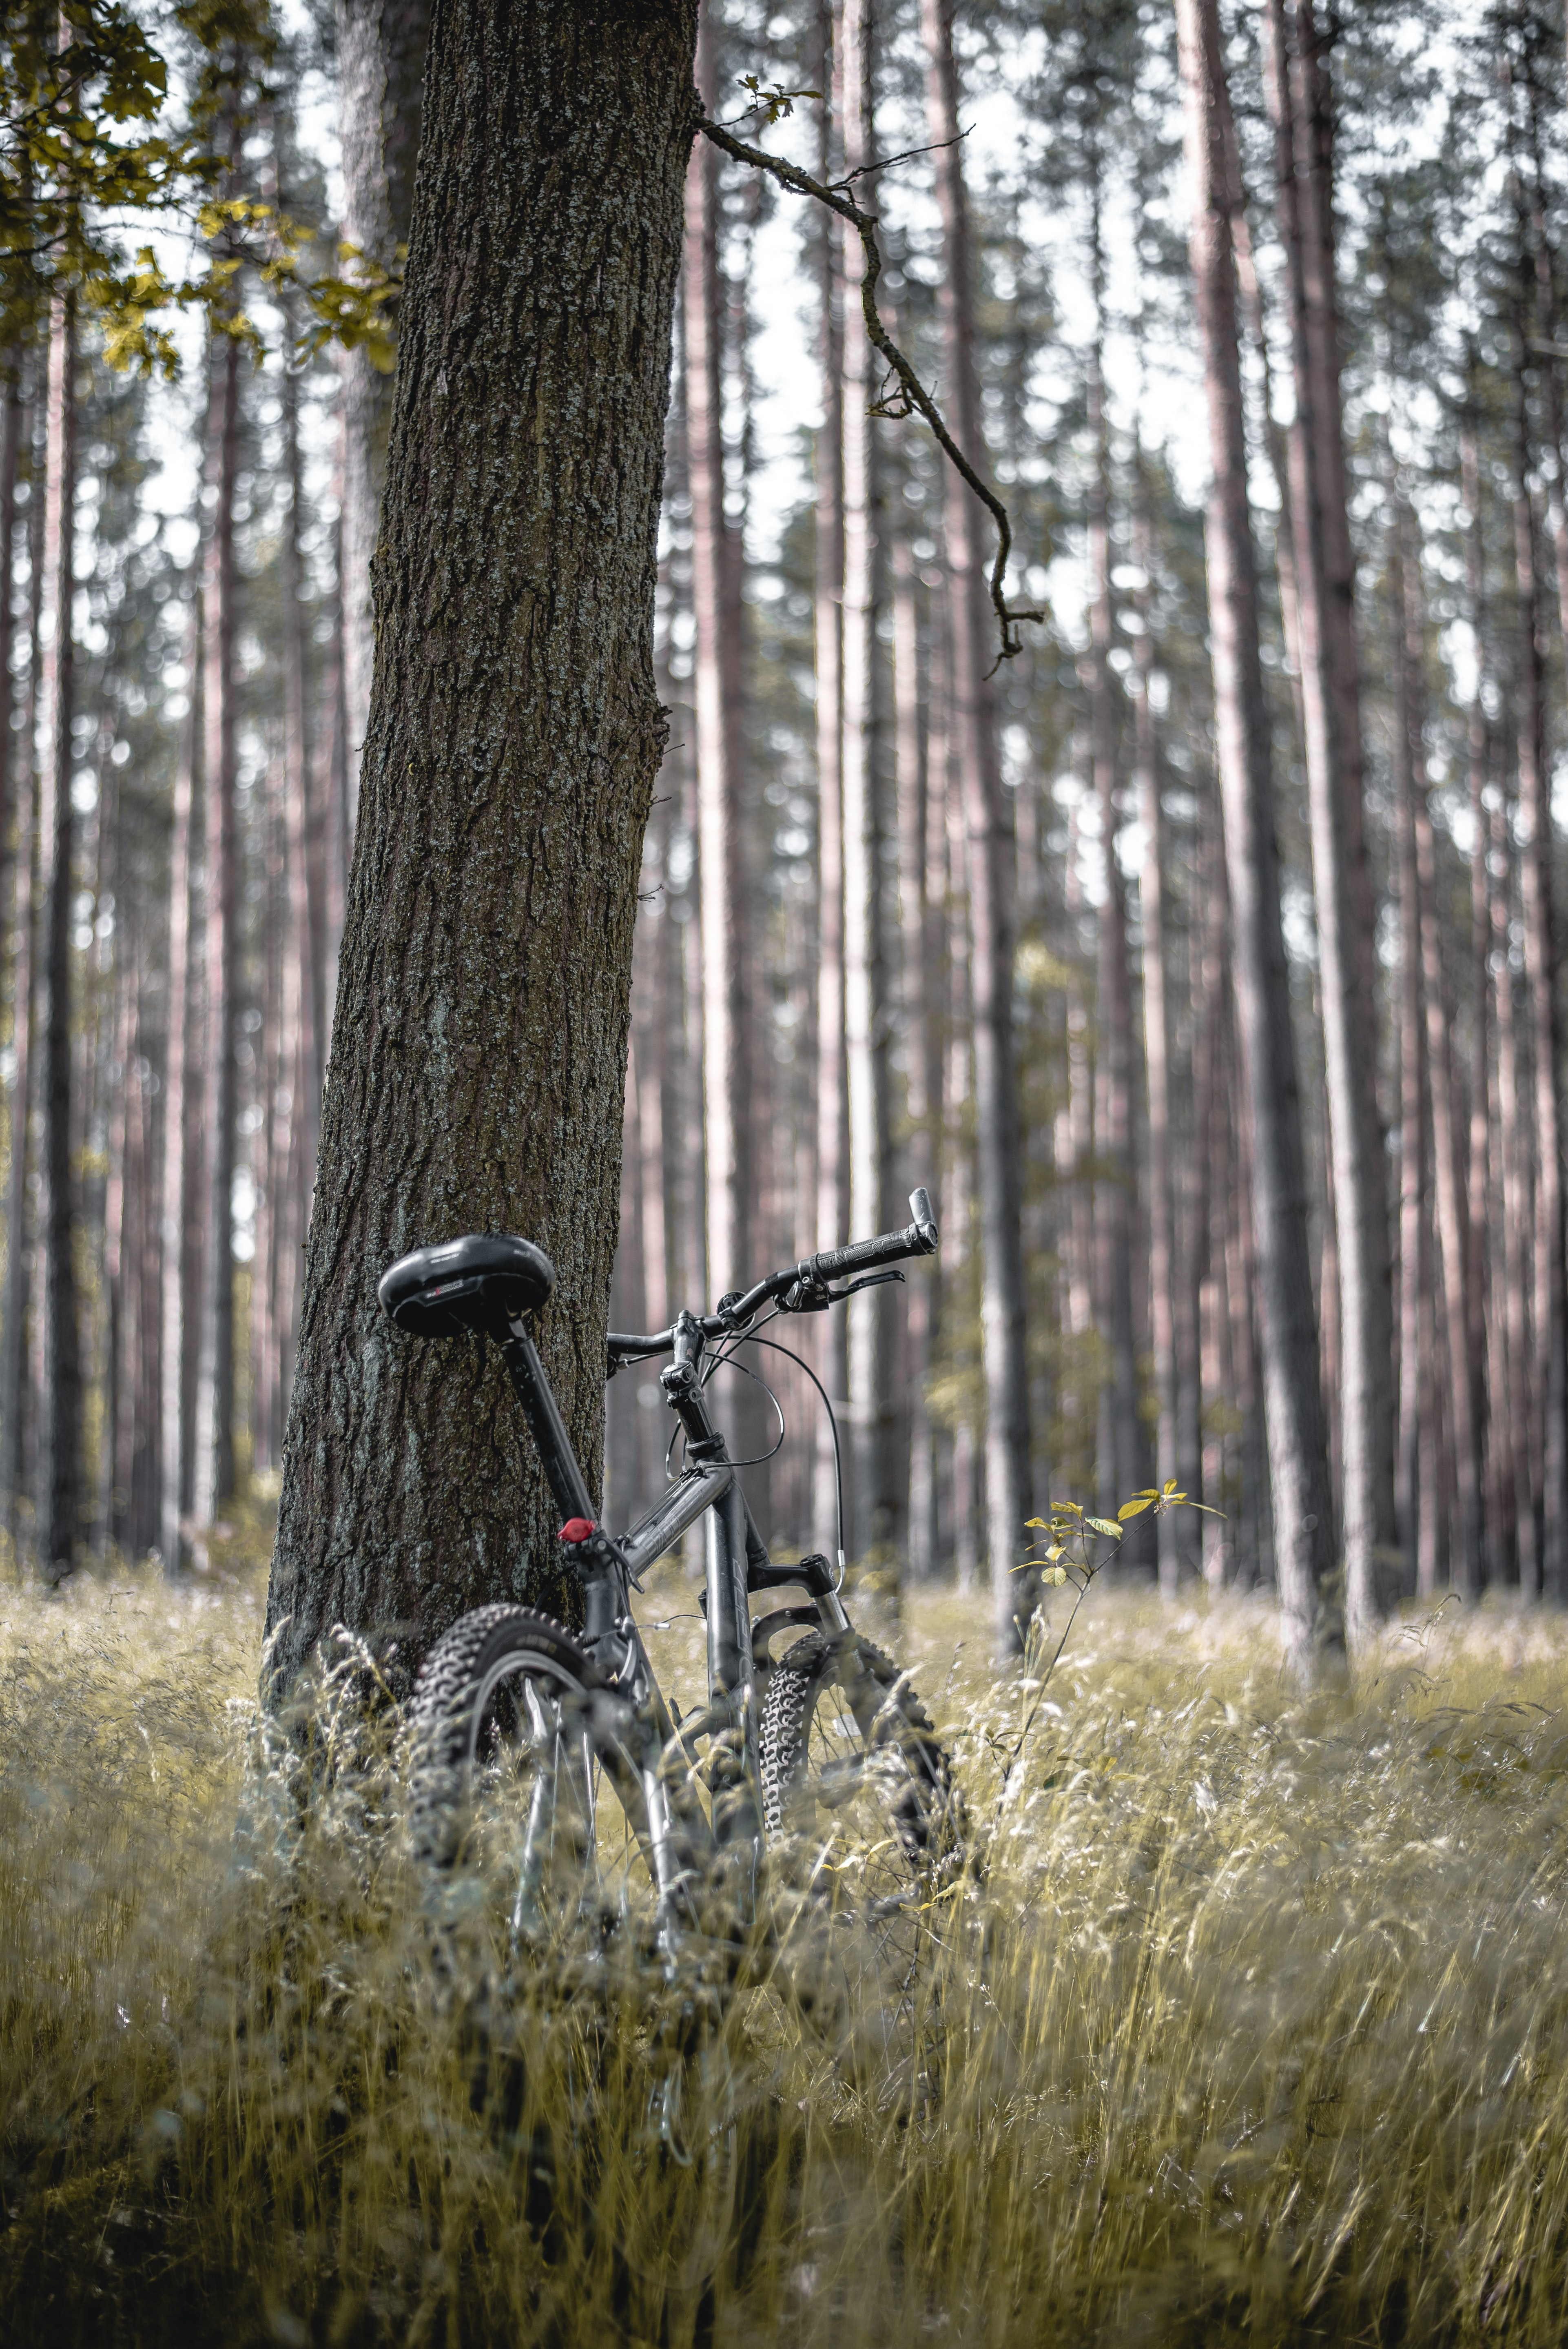 HD wallpaper miscellaneous, trees, miscellanea, forest, stroll, bicycle